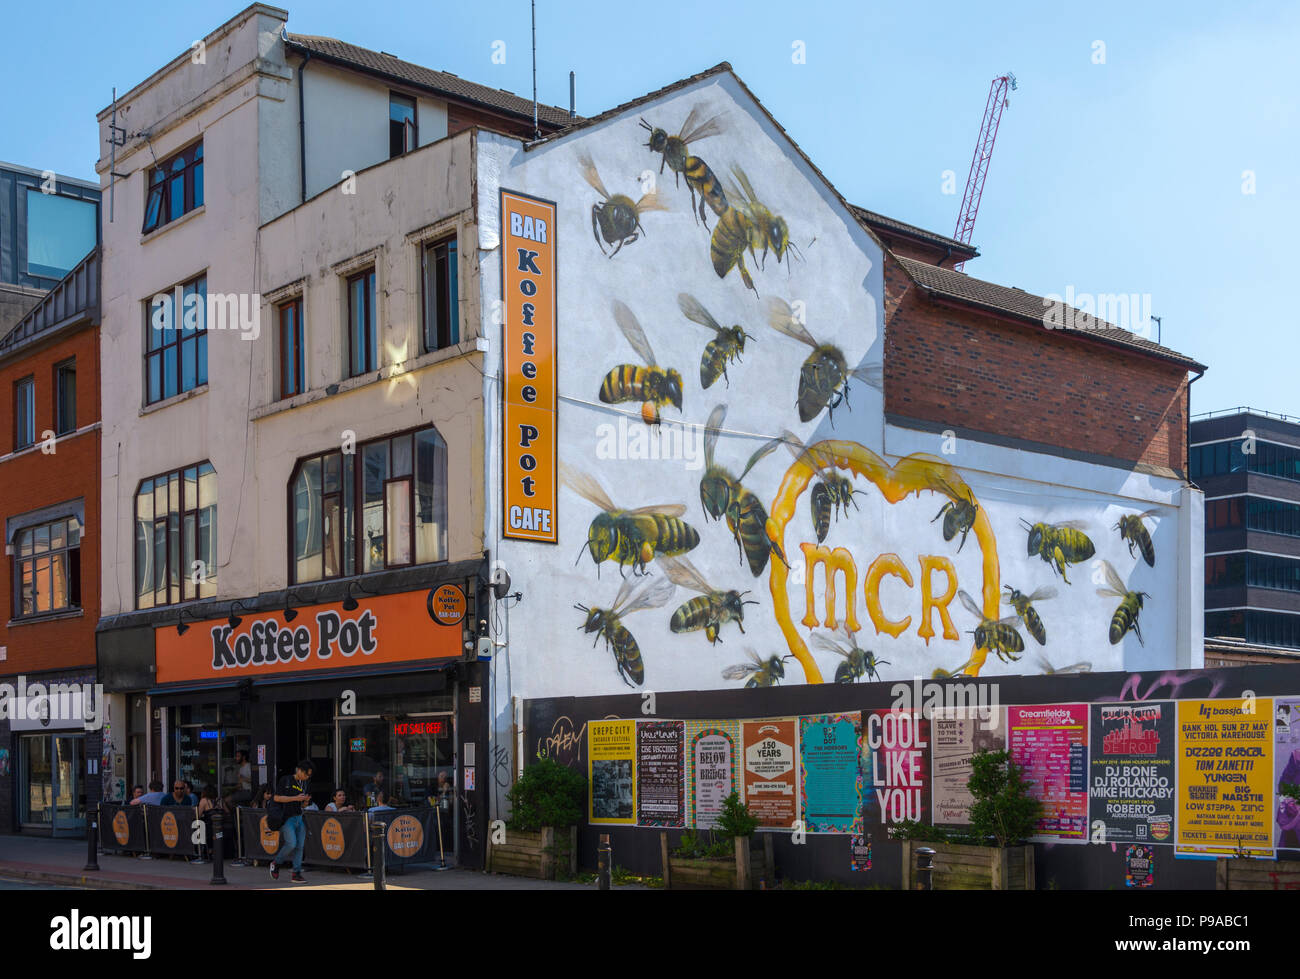 The Koffee Pot cafe with a bee wall painting by Qubek (Russell Meeham ...